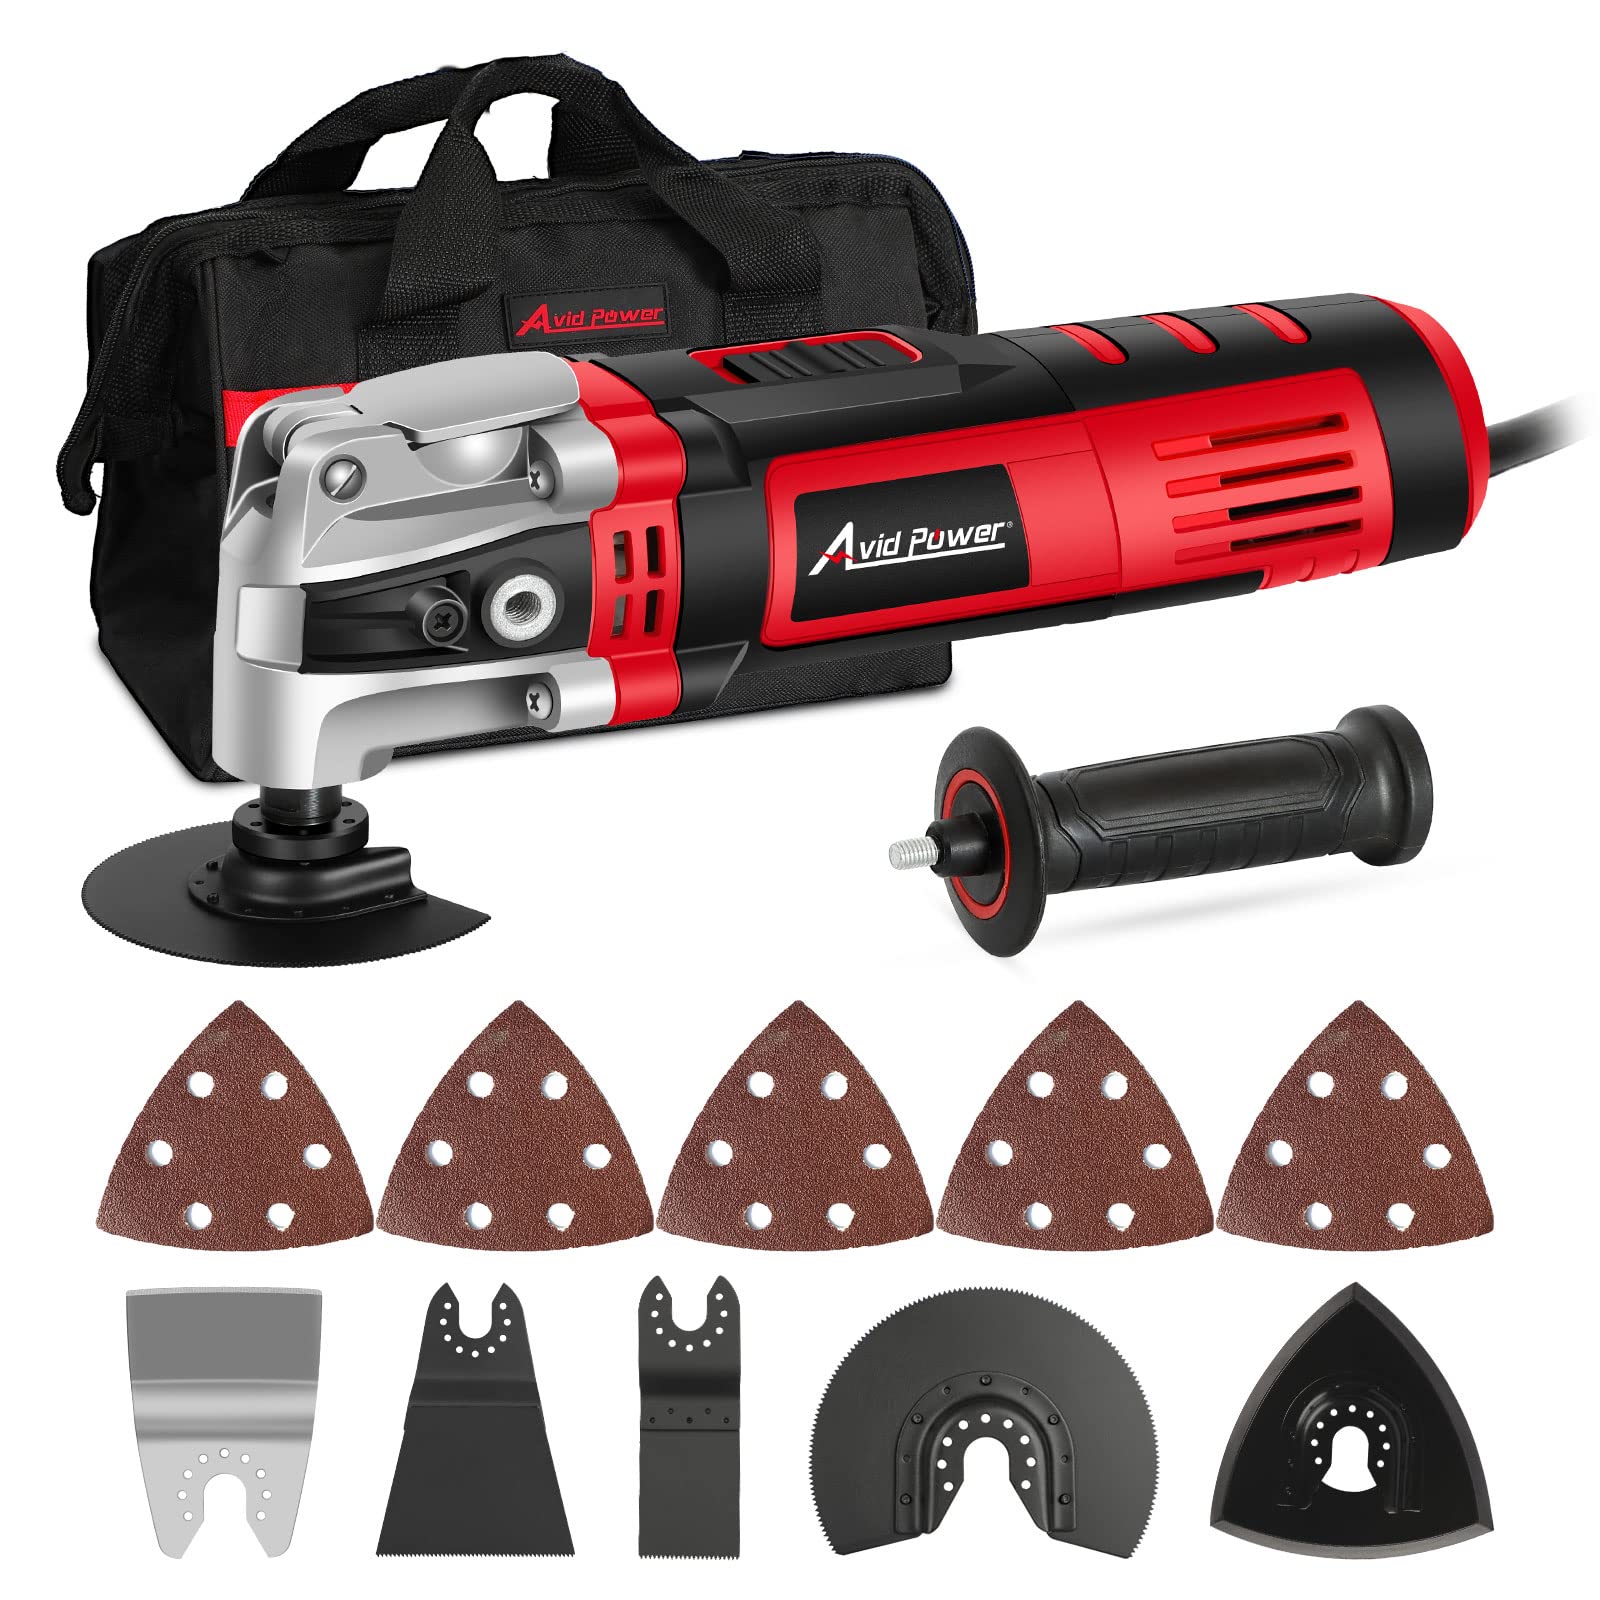 AVID POWER Oscillating Tool 3.5-Amp Oscillating Multi Tool with 4.5 Oscillation Angle 6 Variable Speeds and 13pcs Saw Acc